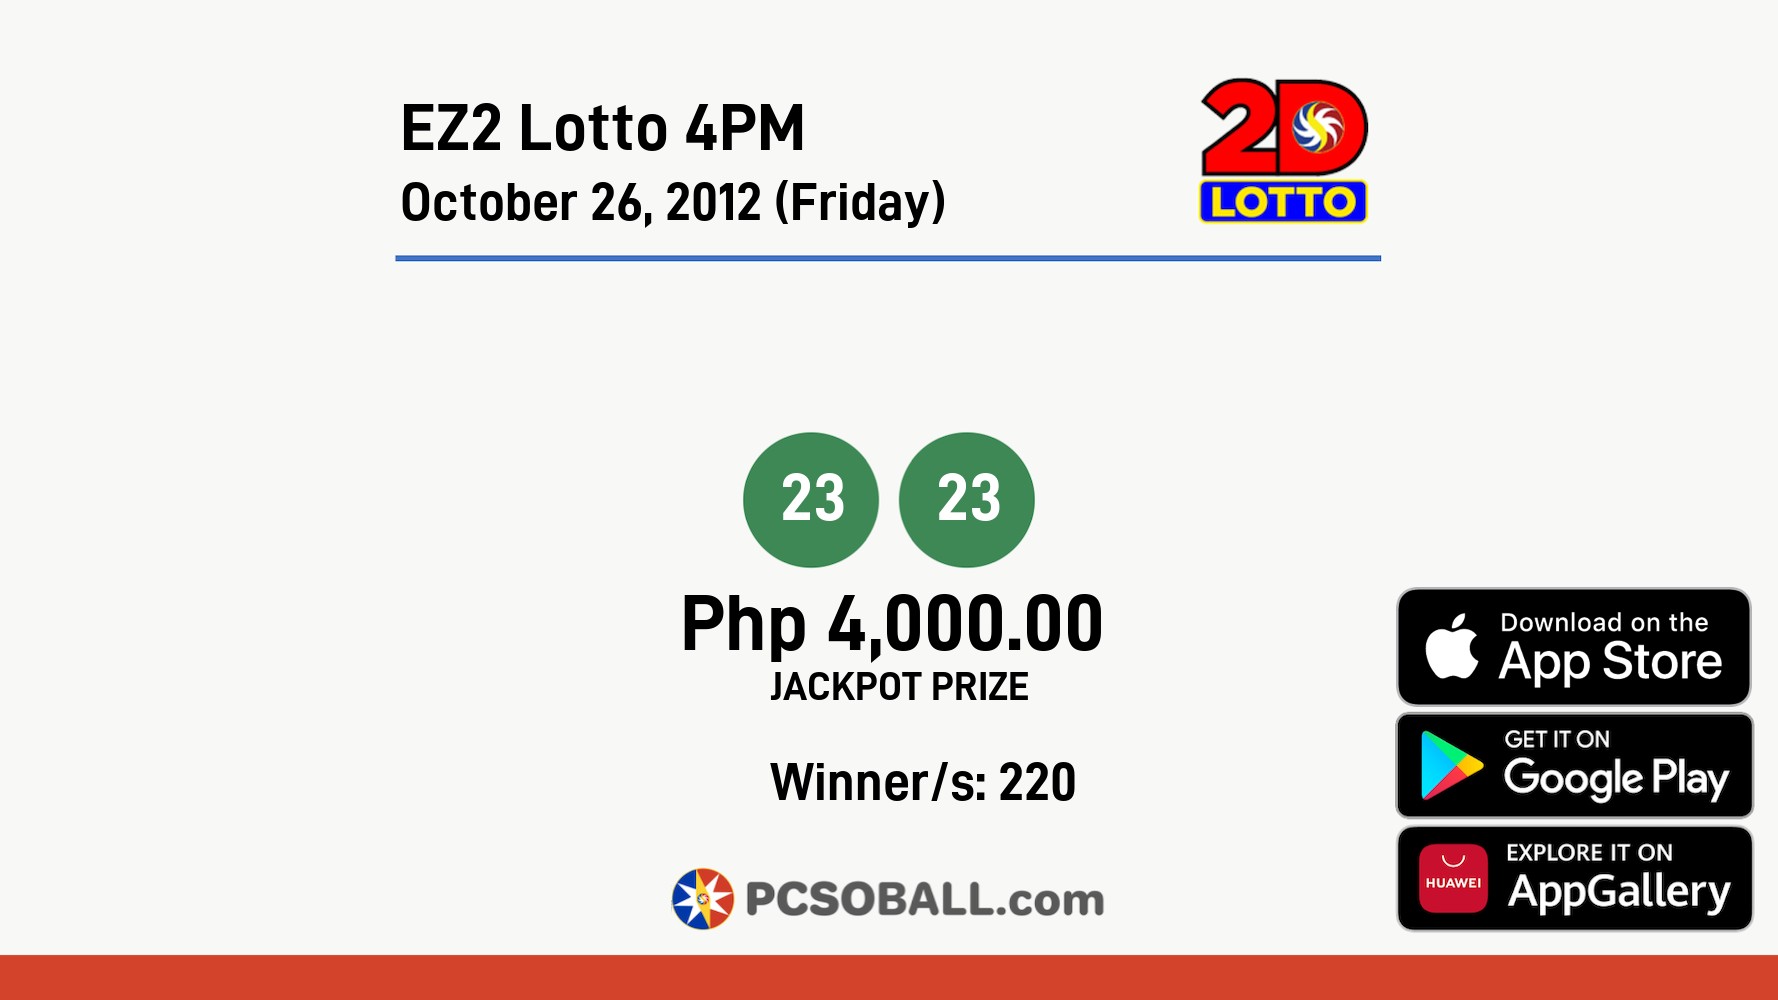 EZ2 Lotto 4PM October 26, 2012 (Friday) Result